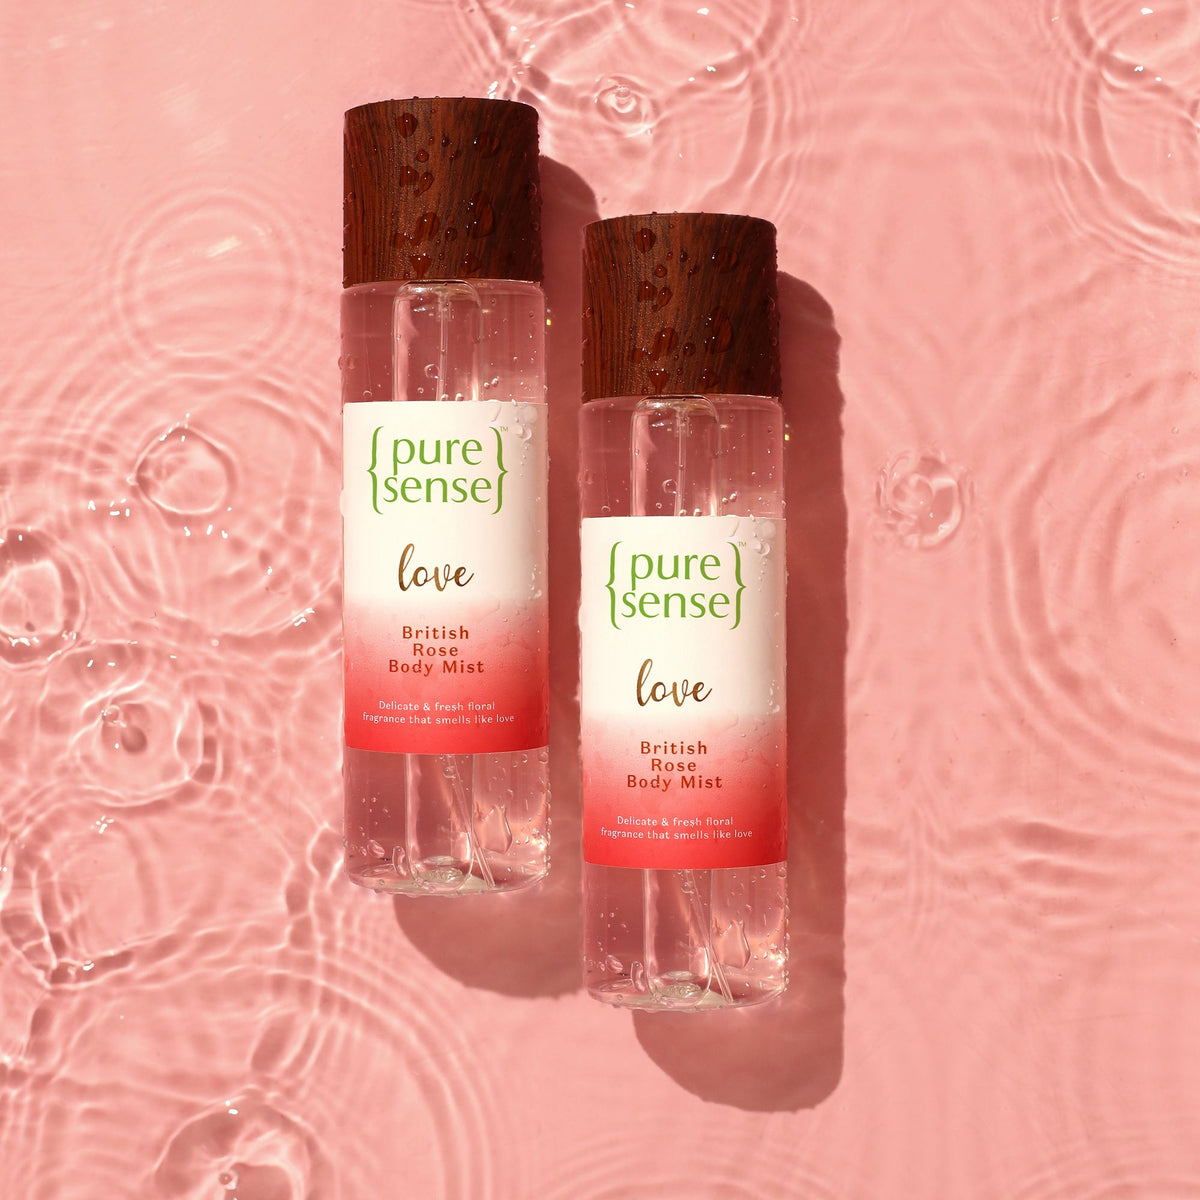 Love British Rose Body Mist (Pack of 2) | From the makers of Parachute Advansed | 300ml